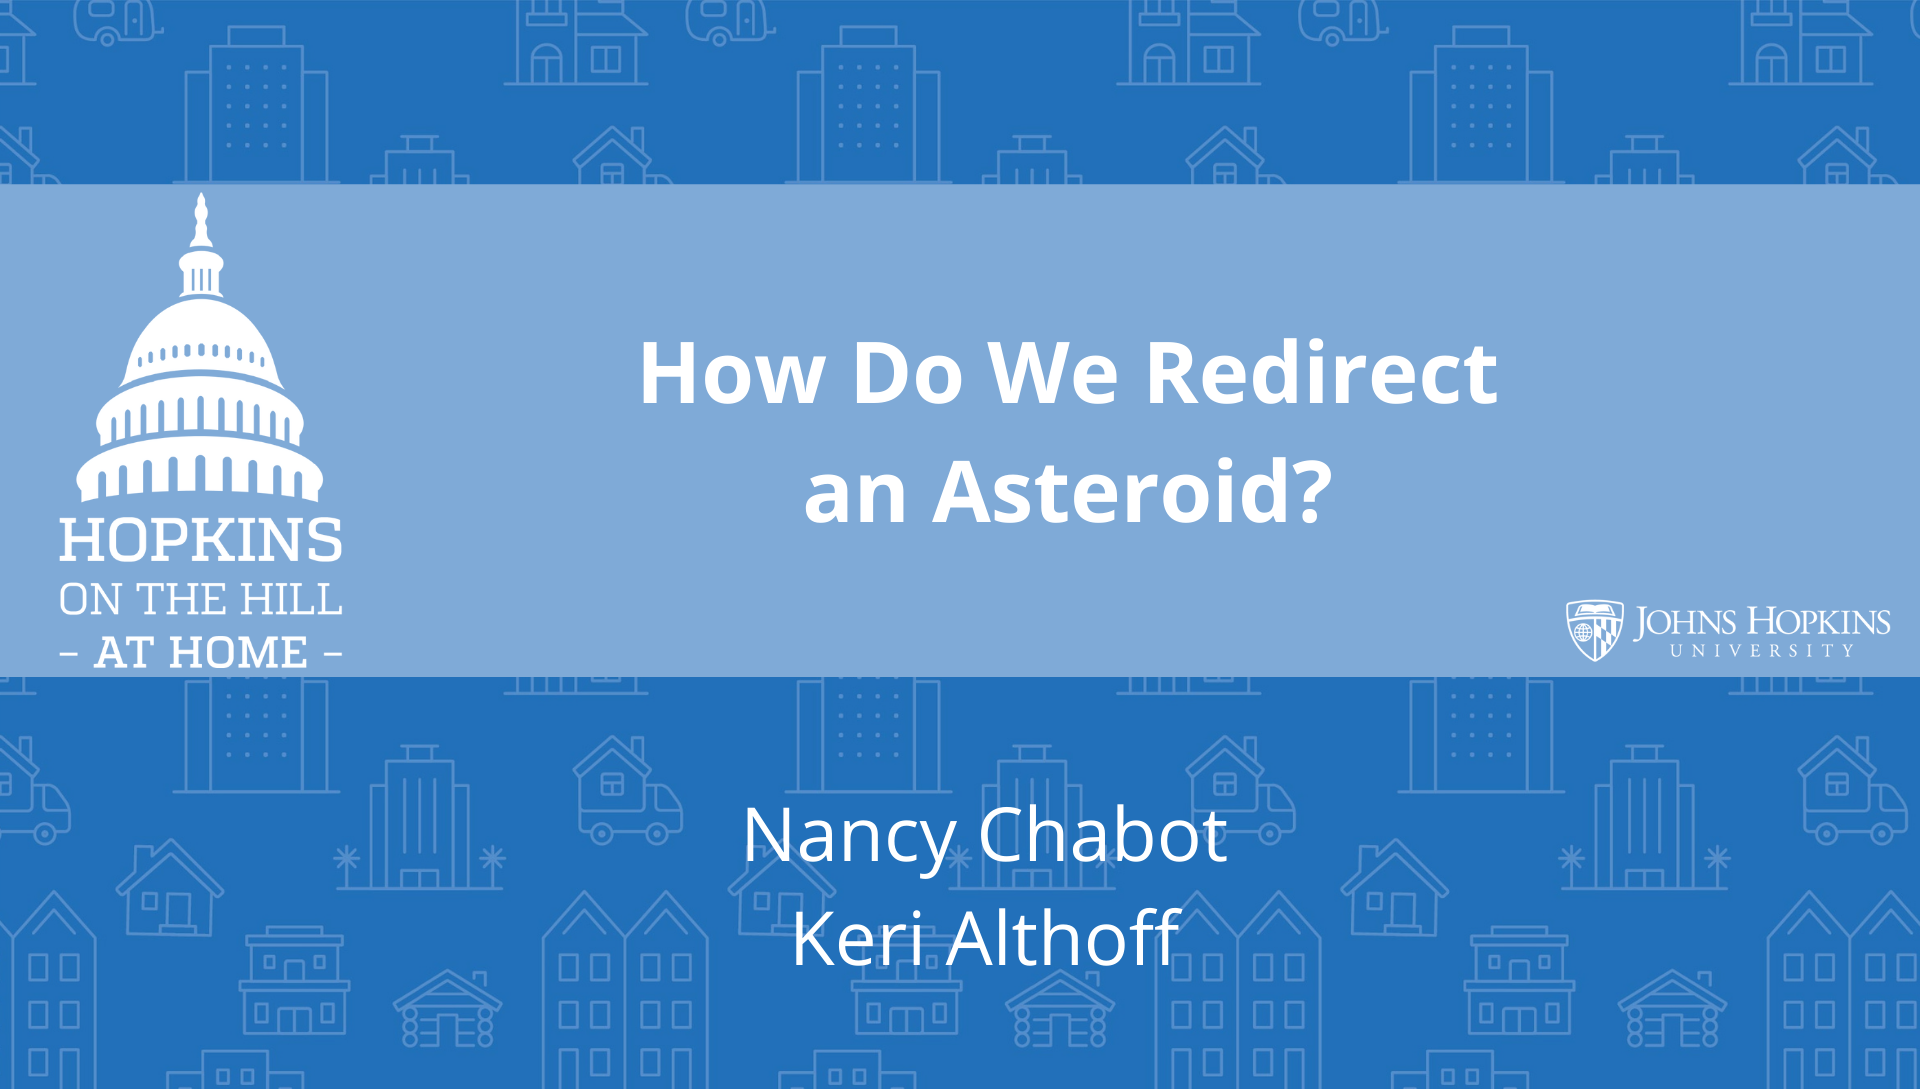 Solid blue background featuring line drawings of various types of homes with text reading “How to redirect an asteroid?” and names listed below: Nancy Chabot, Keri Althoff. On the left the Hopkins on the Hill at Home logo featuring the Capitol Dome. On the right, the Johns Hopkins University logo. 